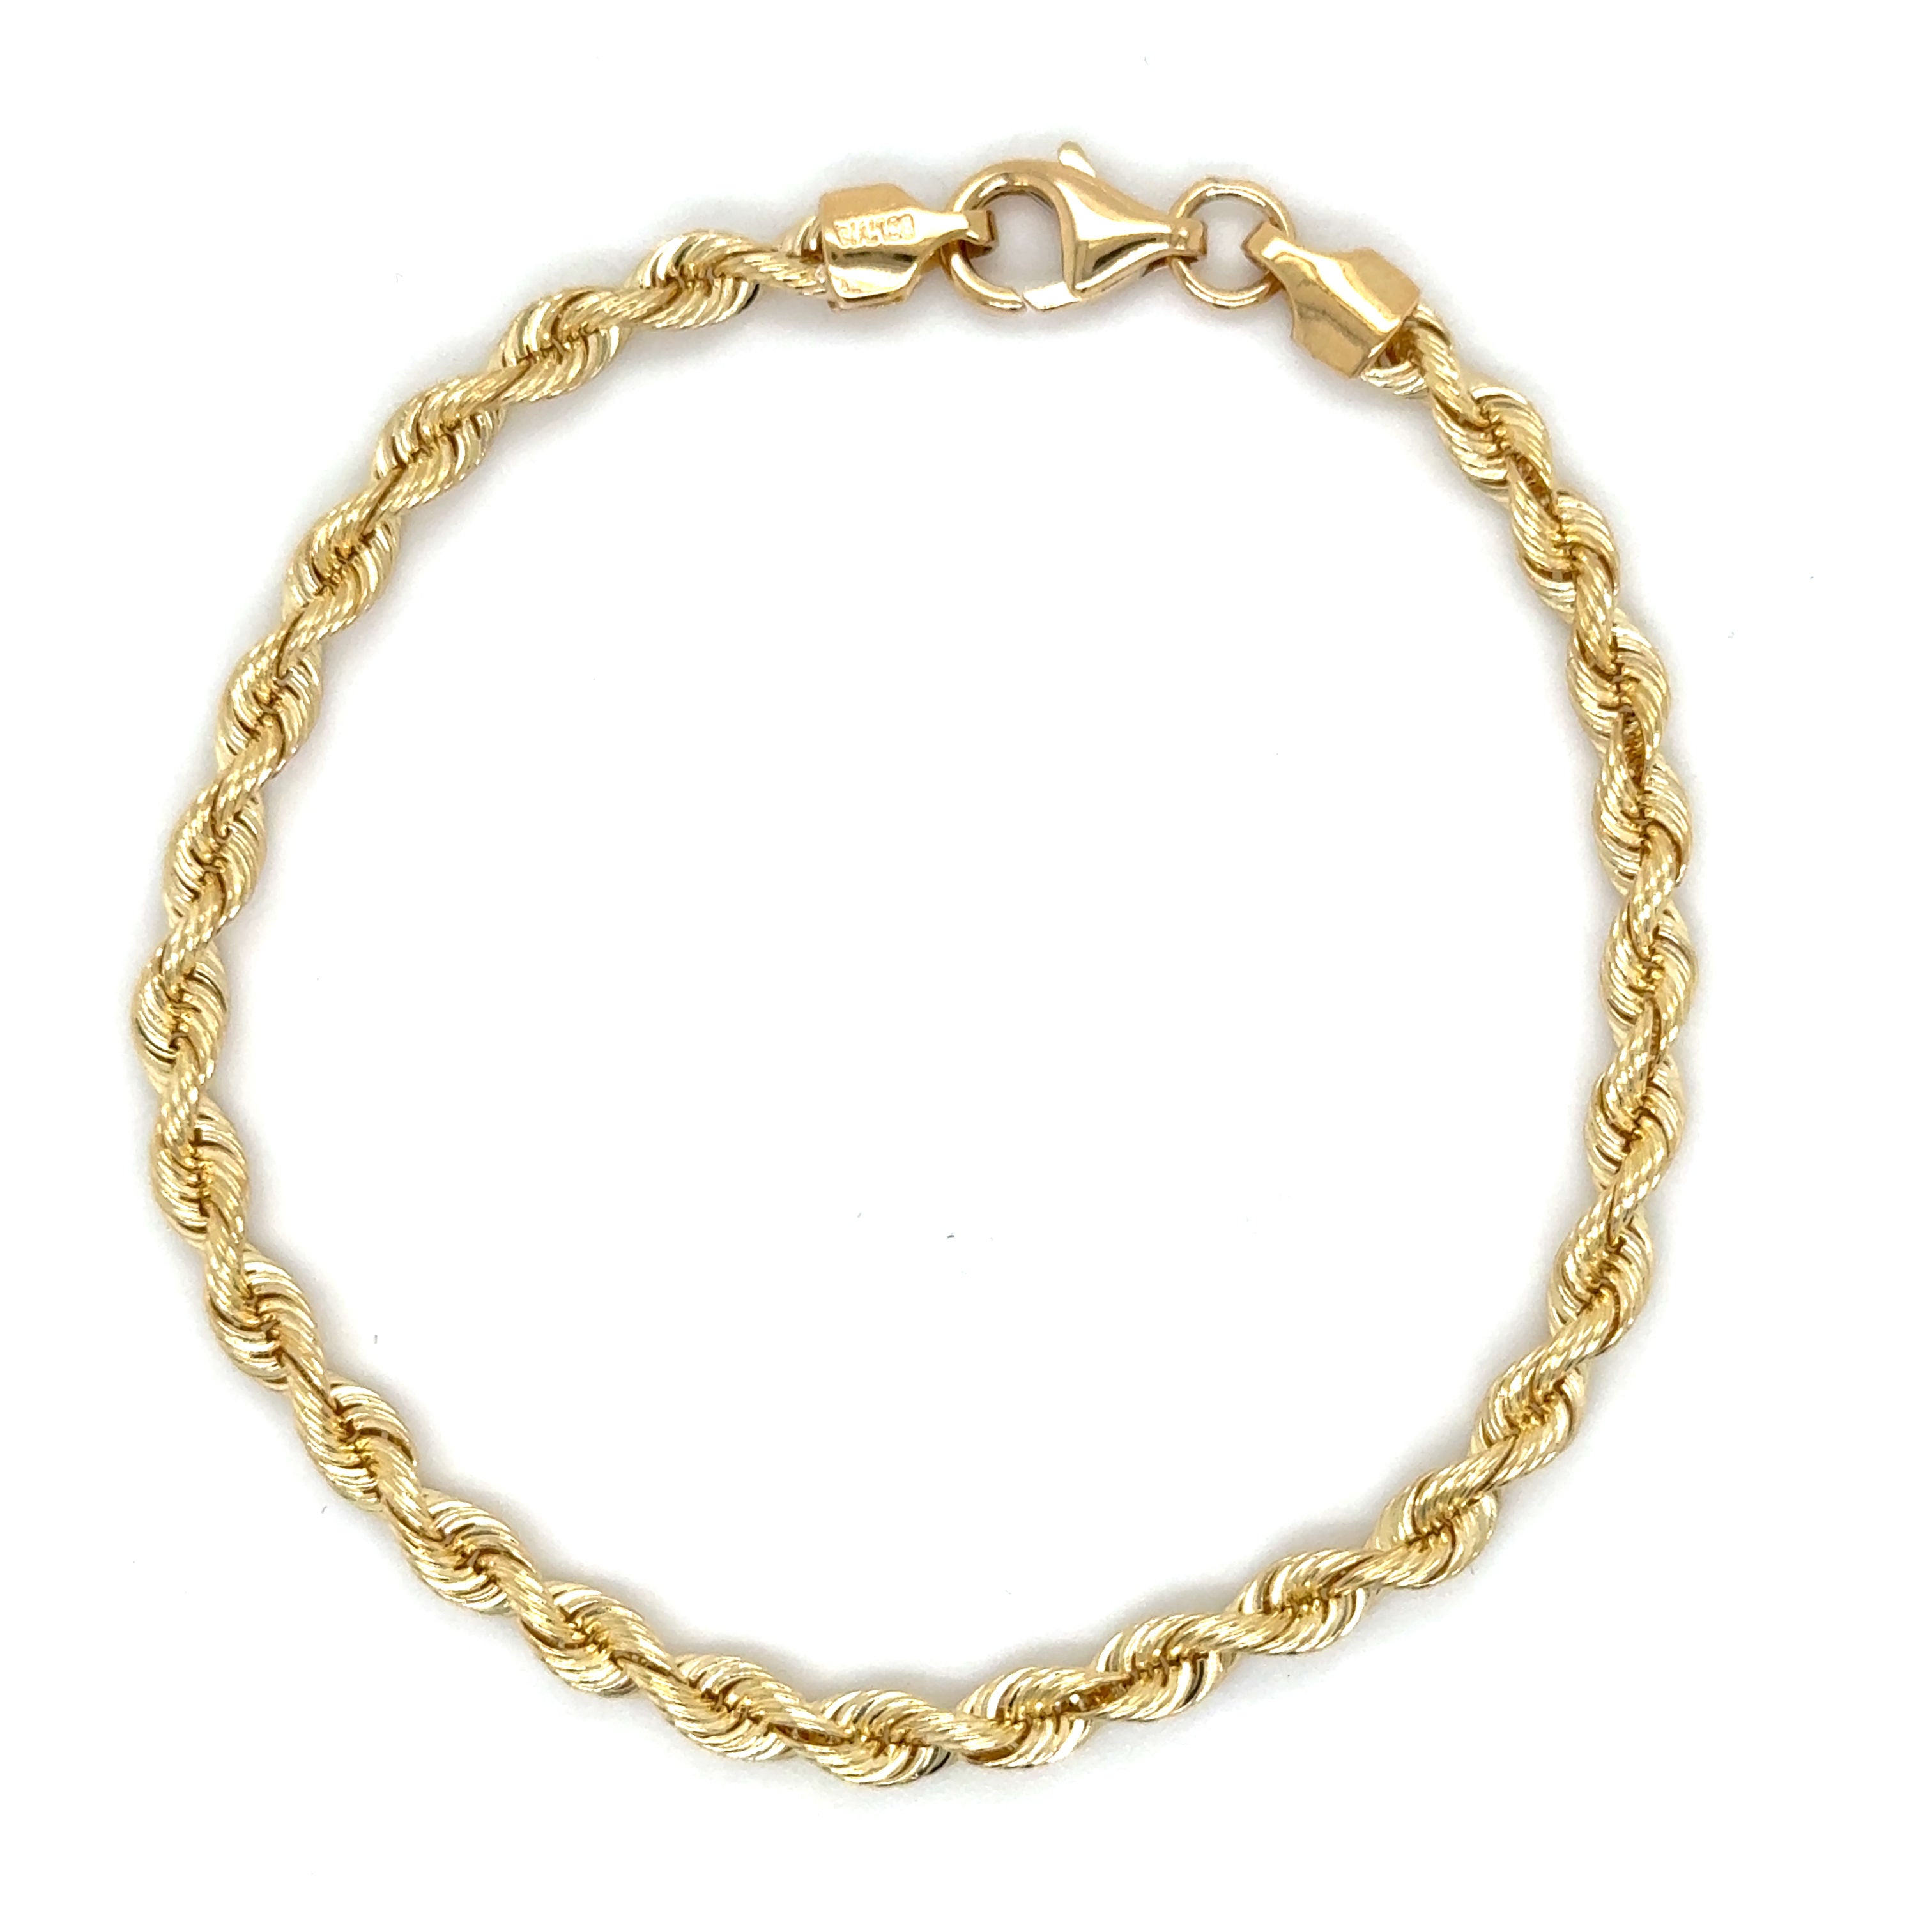 Solid 14k yellow gold rope bracelet